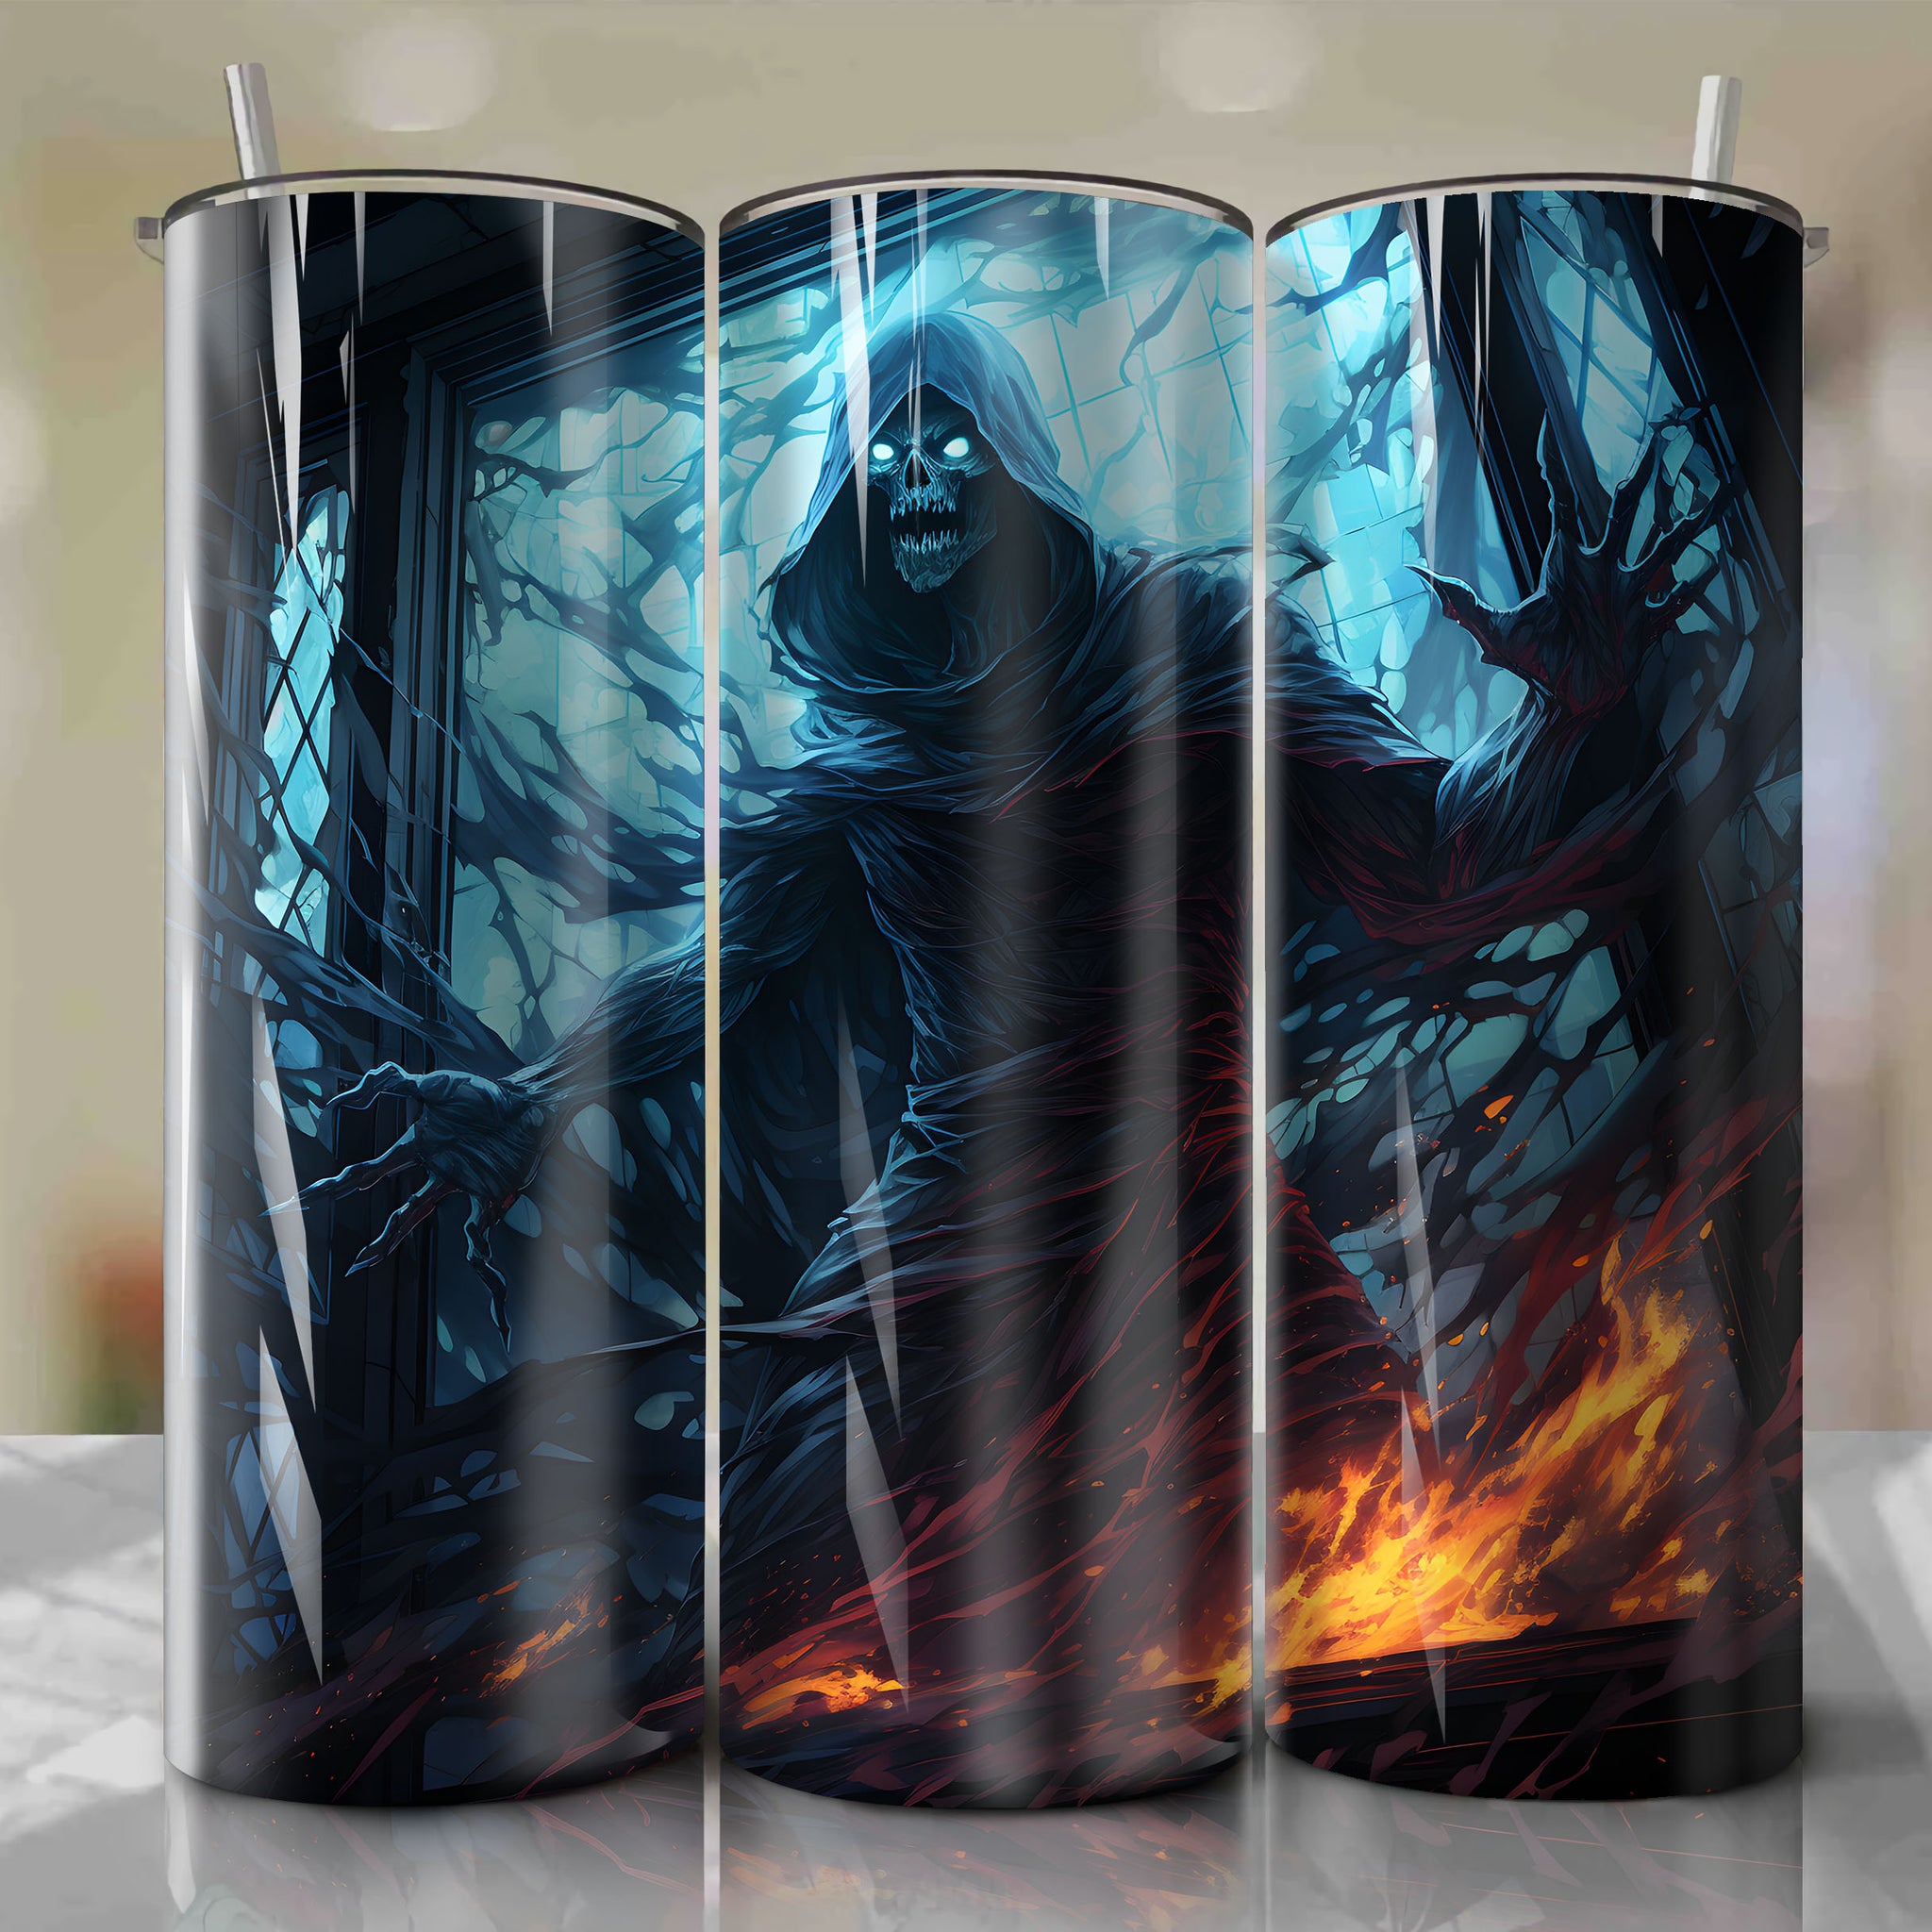 Tumbler Wrap - Spectral Ghost, Shattered Attic Window 3D Rendering